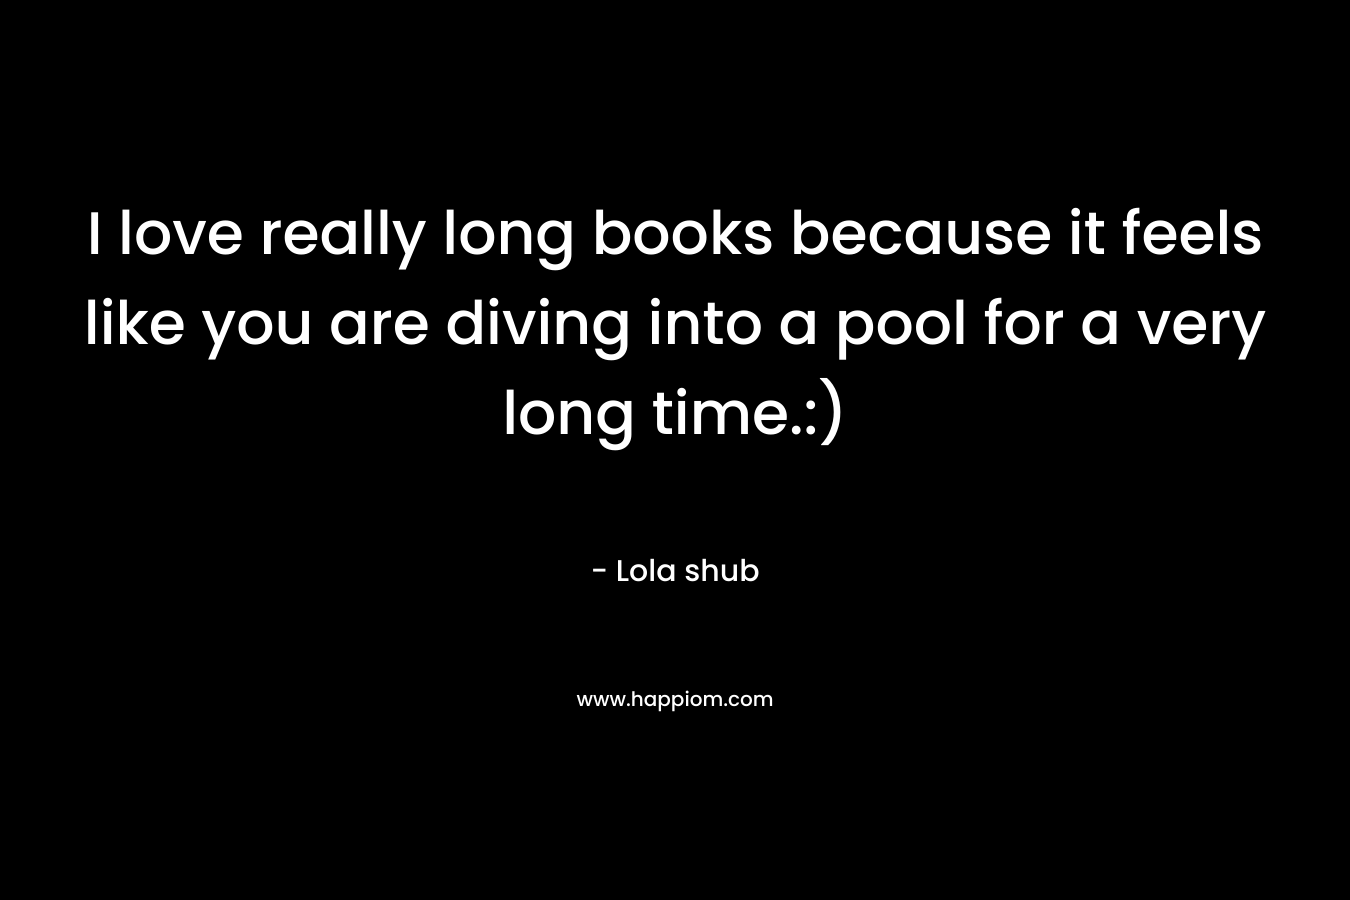 I love really long books because it feels like you are diving into a pool for a very long time.:) – Lola shub